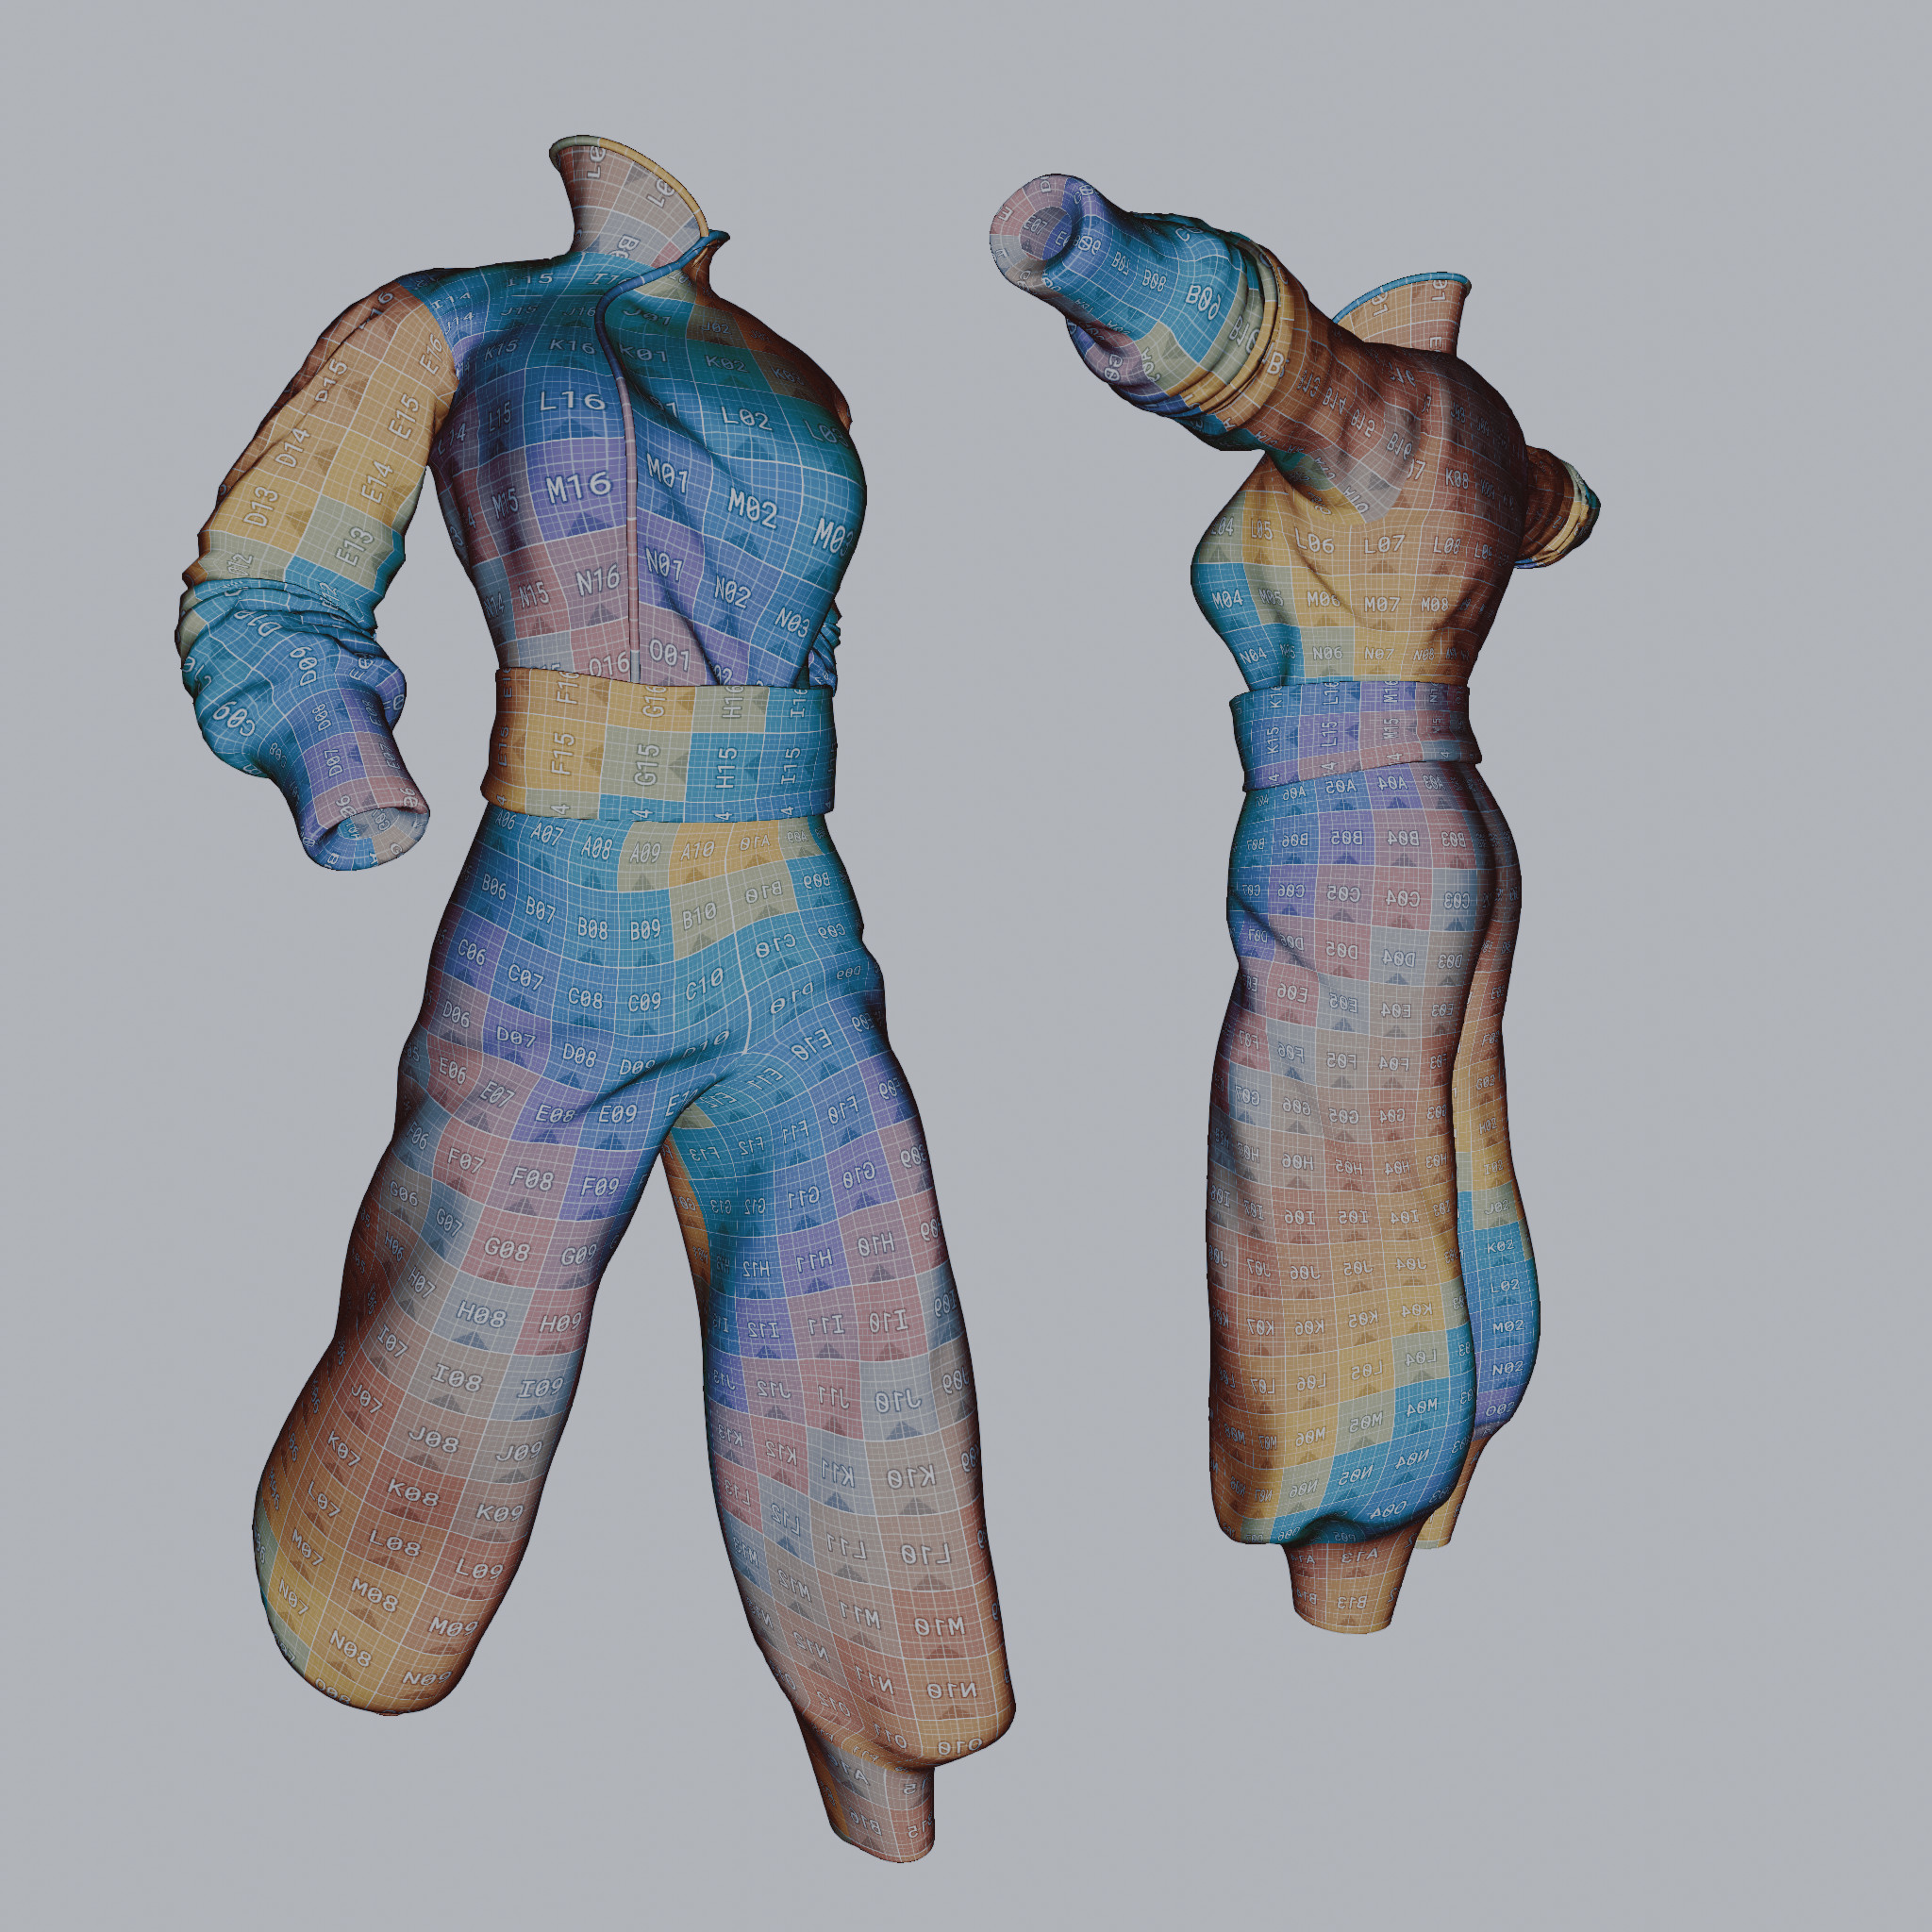 UV overview. split into easier parts (arms, cuffs, etc), and seamed for seamless tiling.